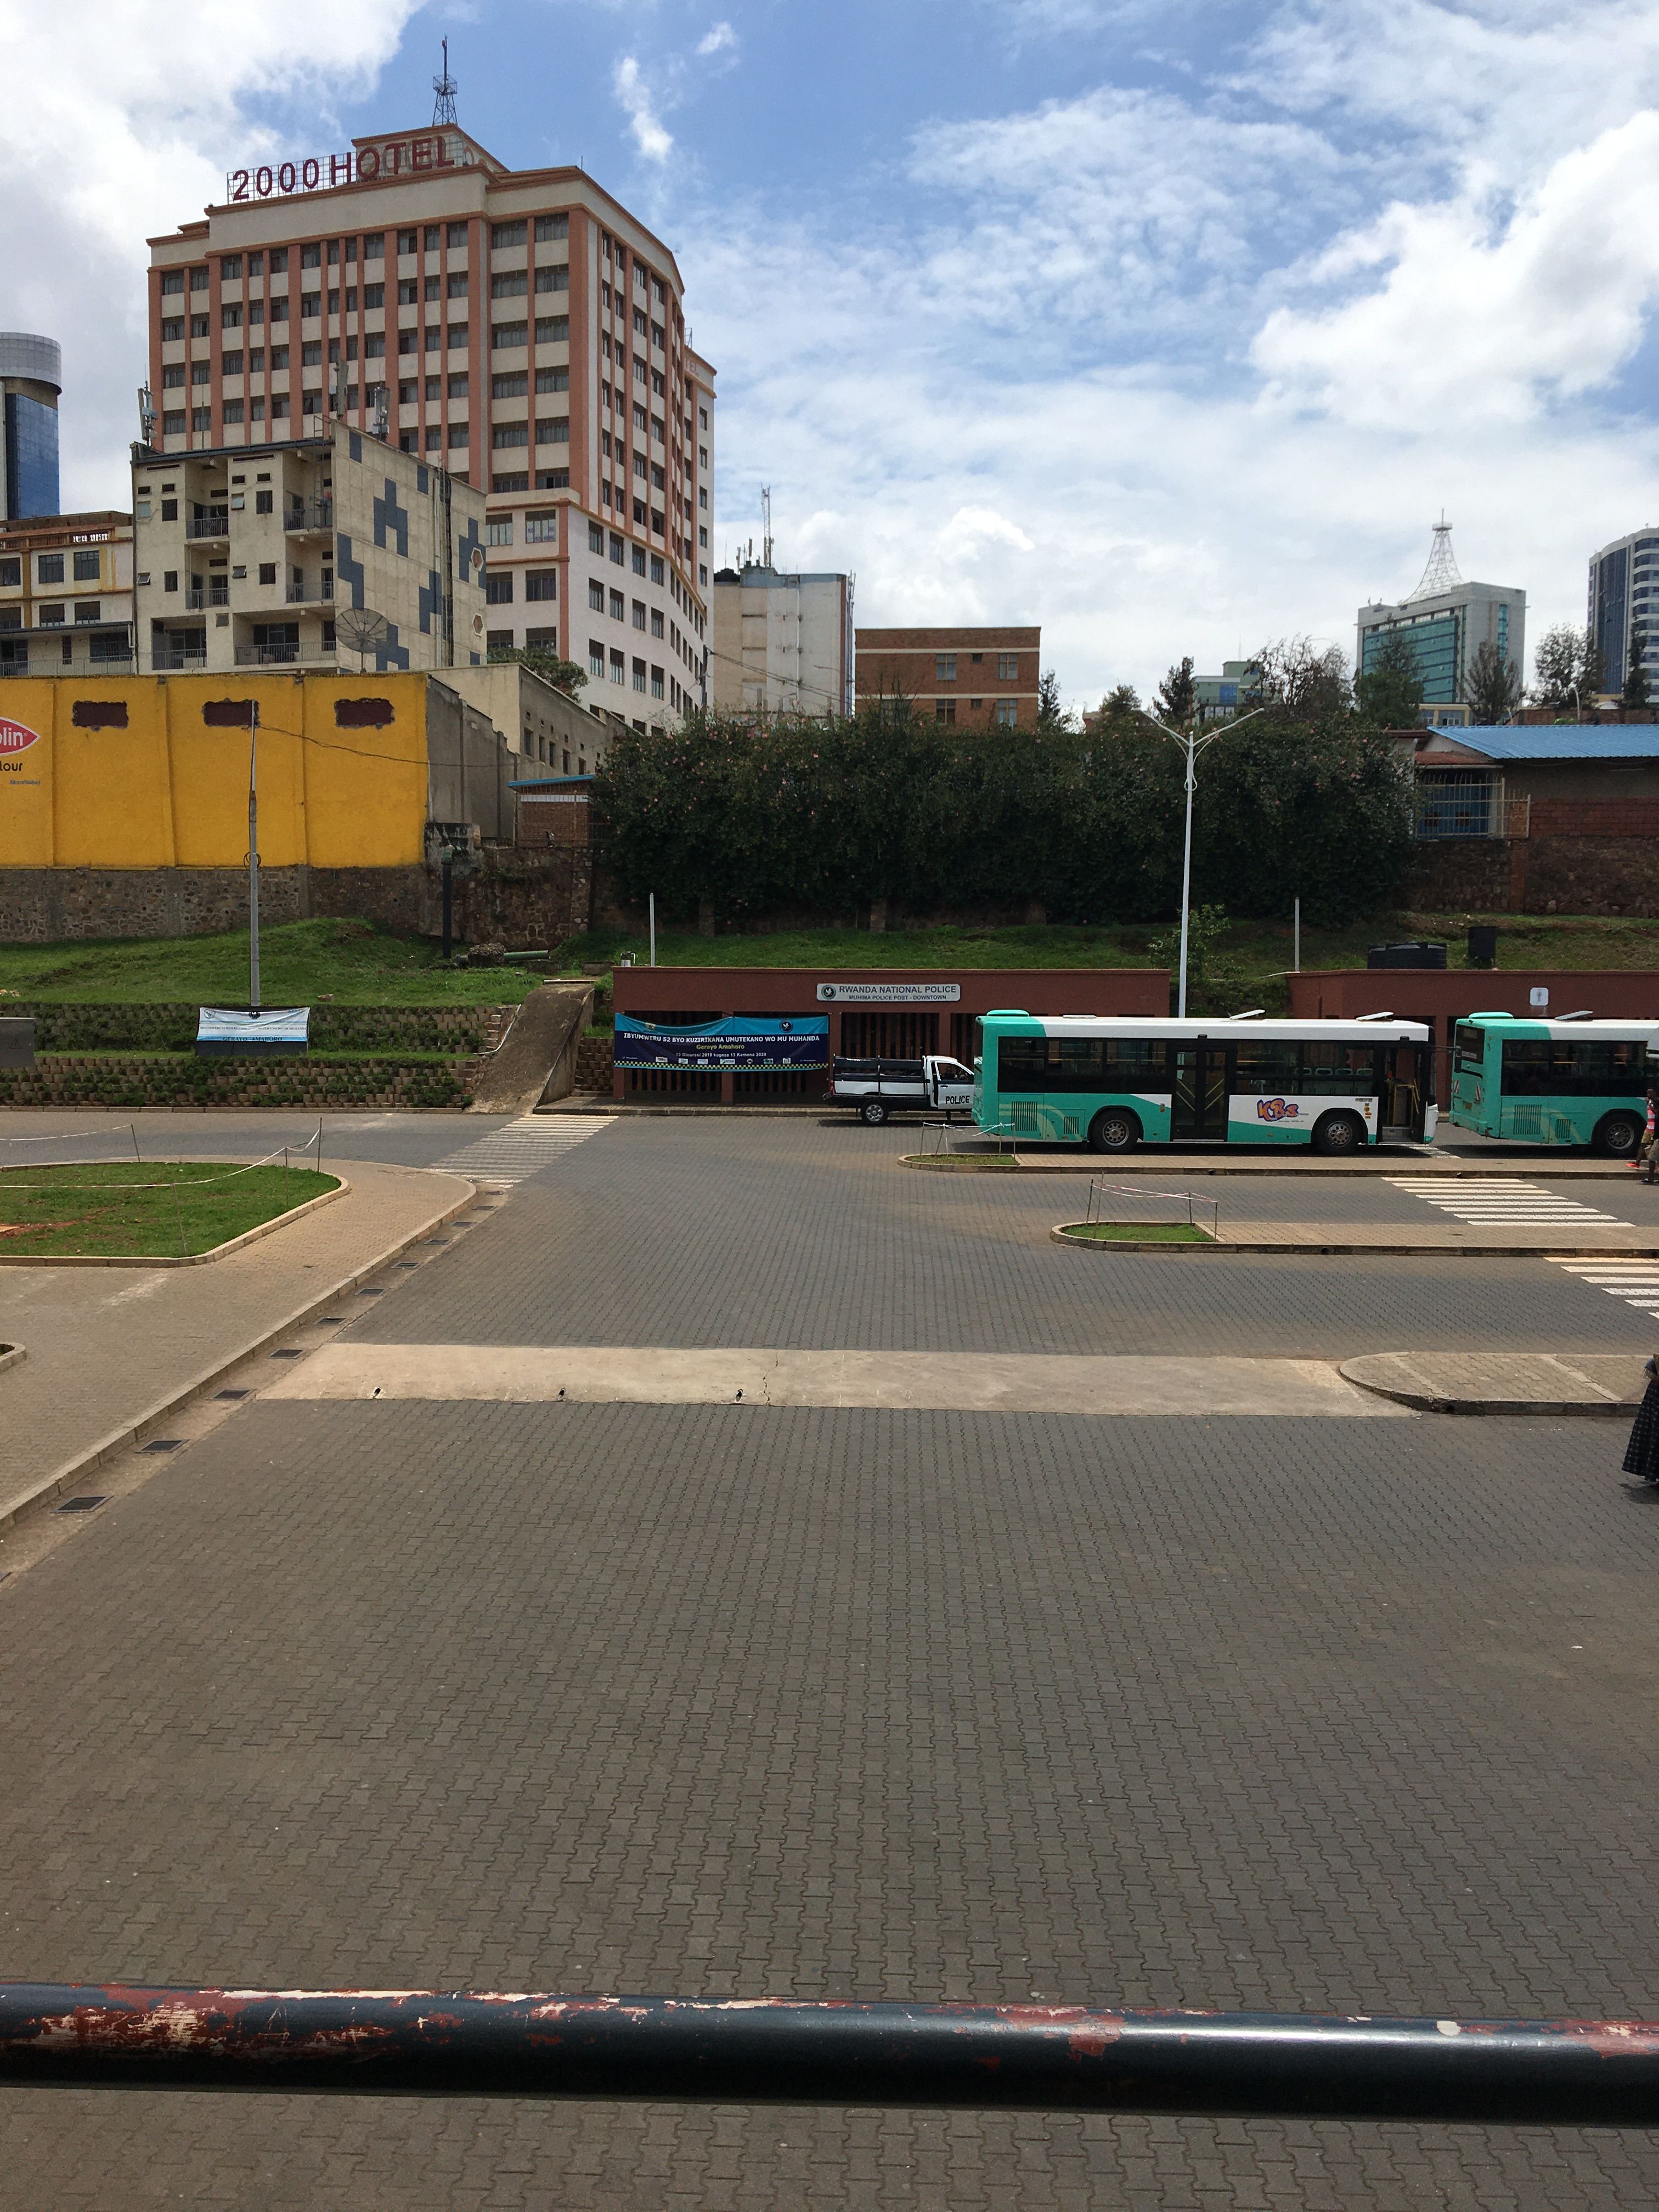 The bus station in Kigali city